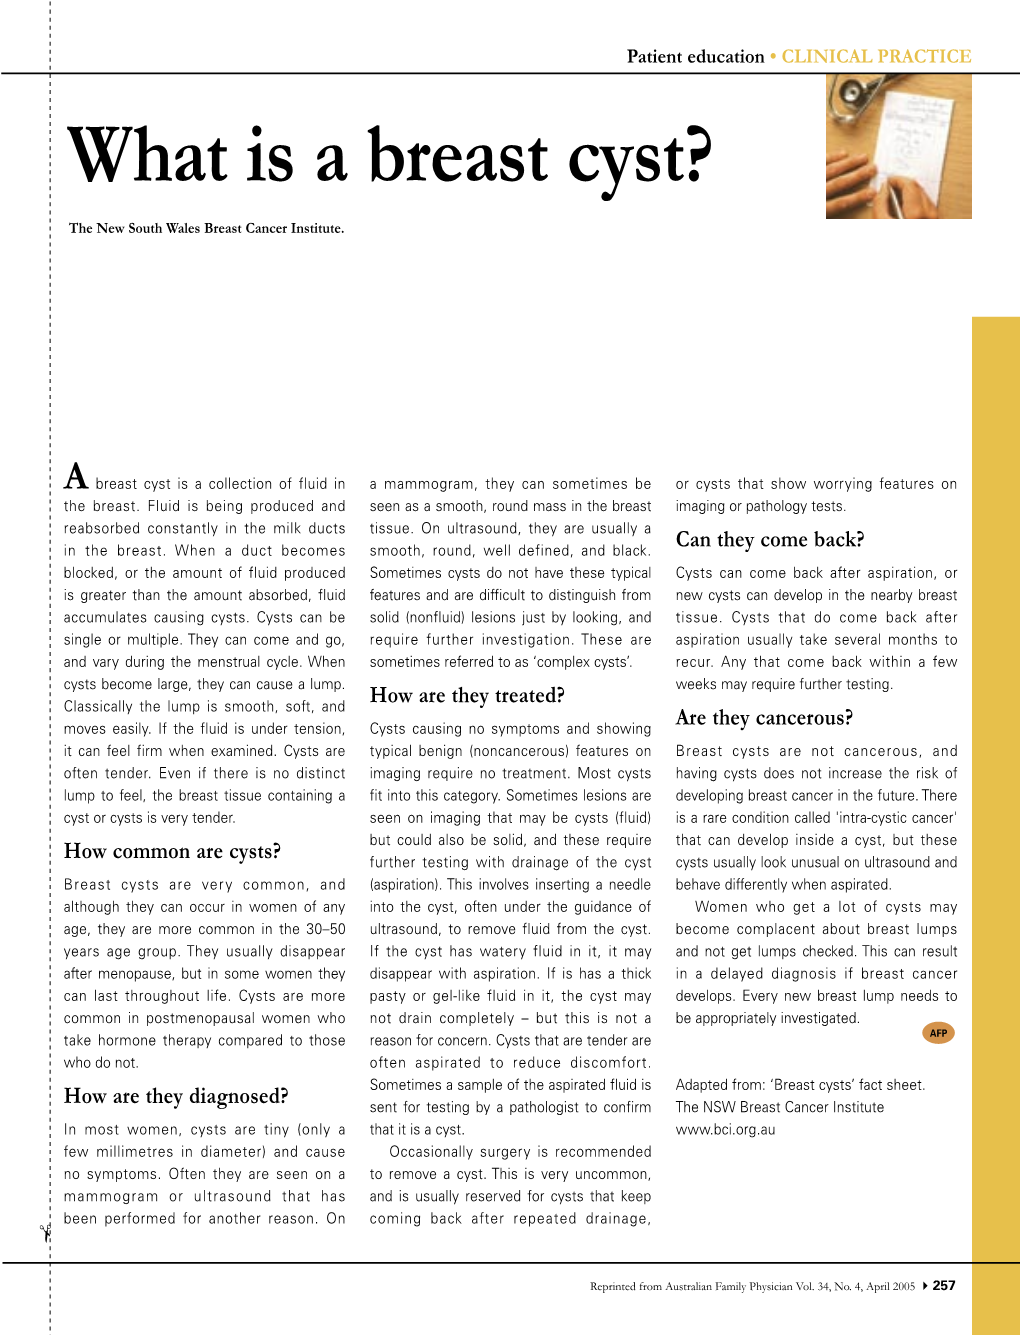 What Is a Breast Cyst (Pdf 59KB)